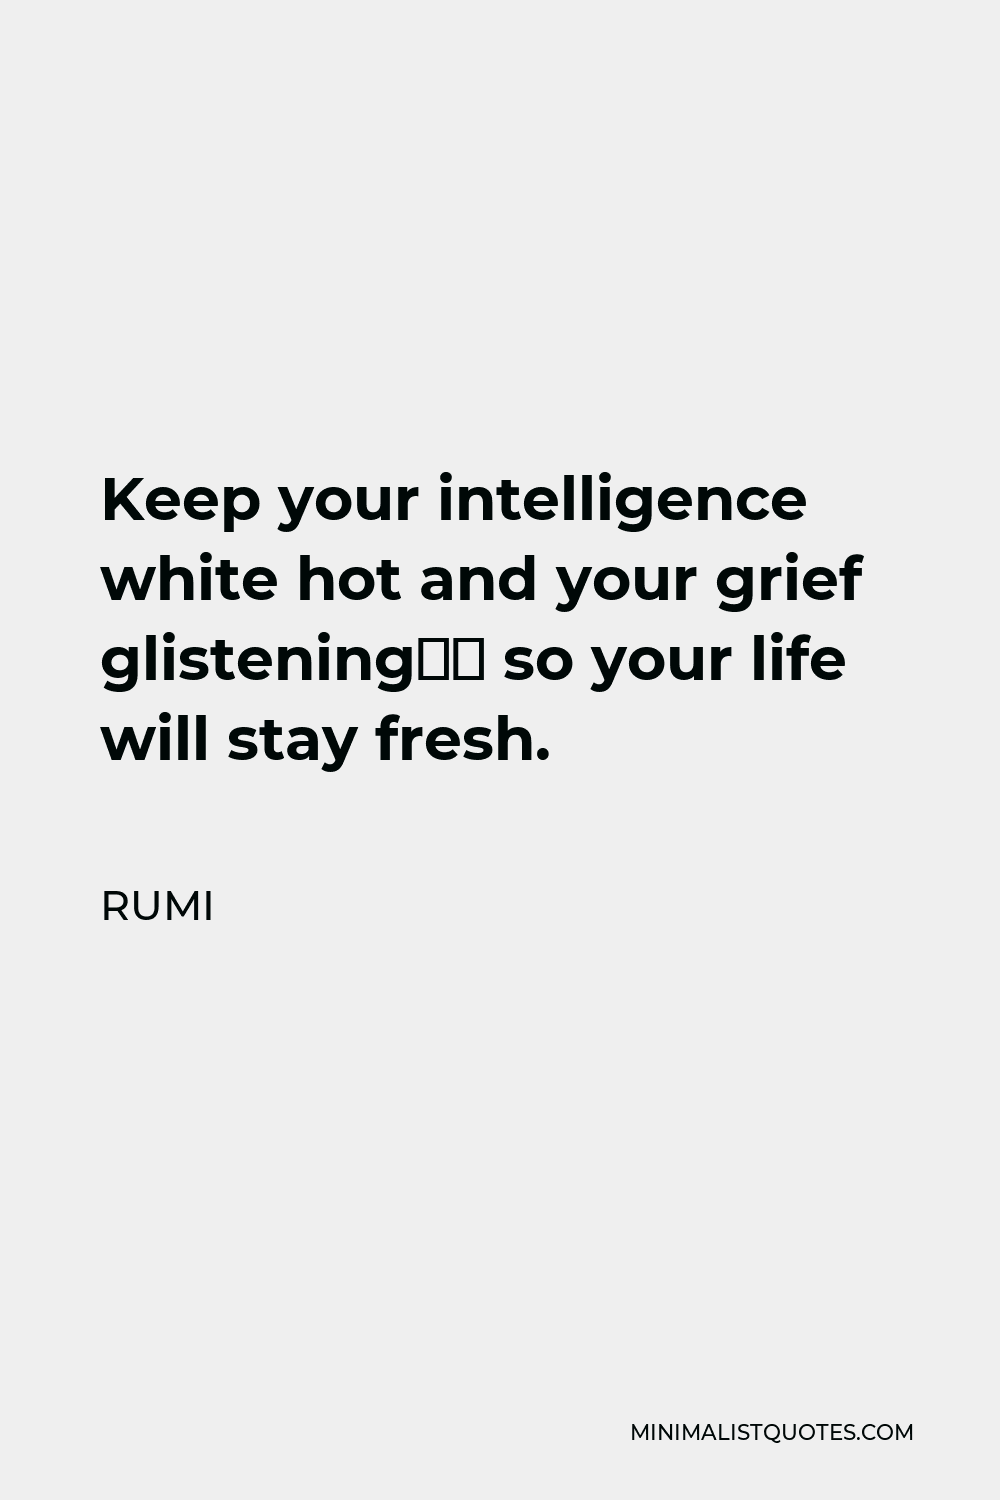 Rumi Quote - Keep your intelligence white hot and your grief glistening“ so your life will stay fresh.